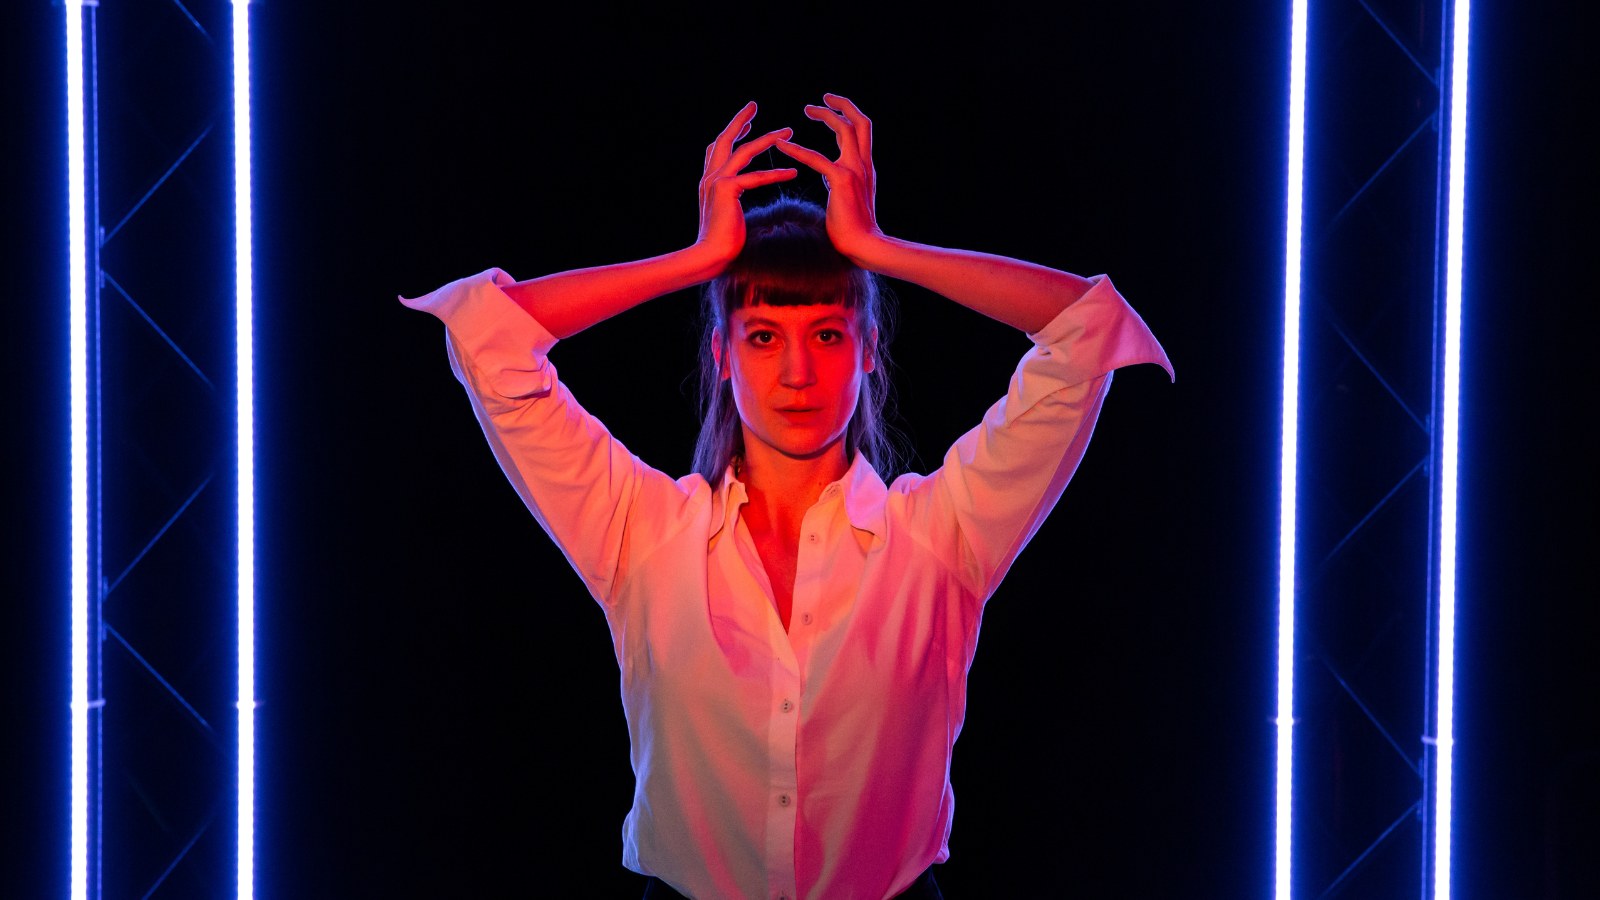 A woman stands in a white shirt flooded with red light. She makes a crown shape above her head with her hands.